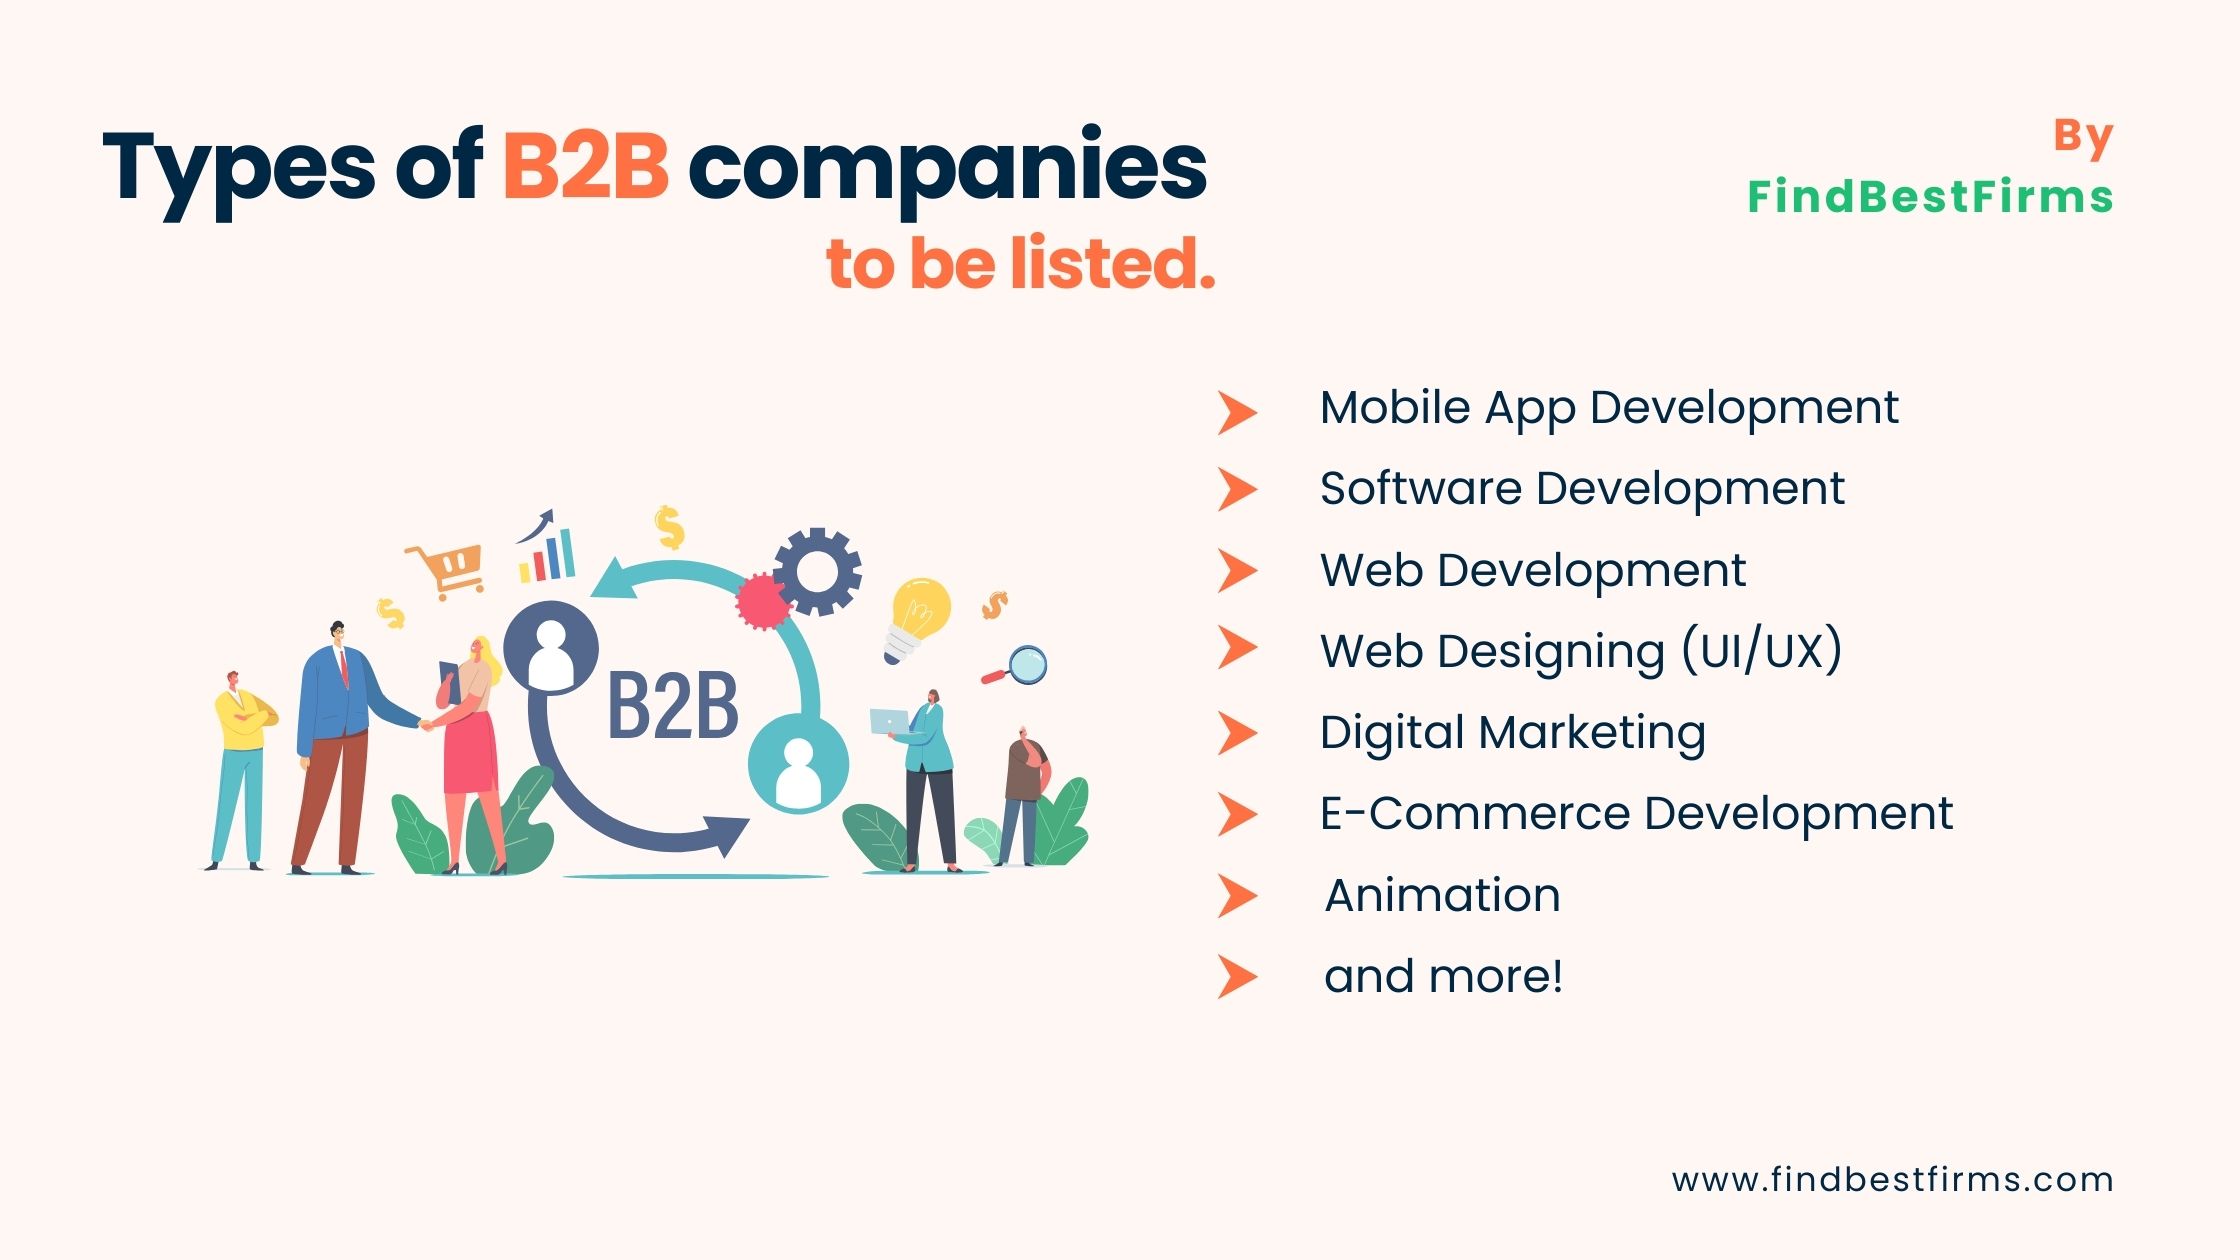 Types of B2B companies to be listed.